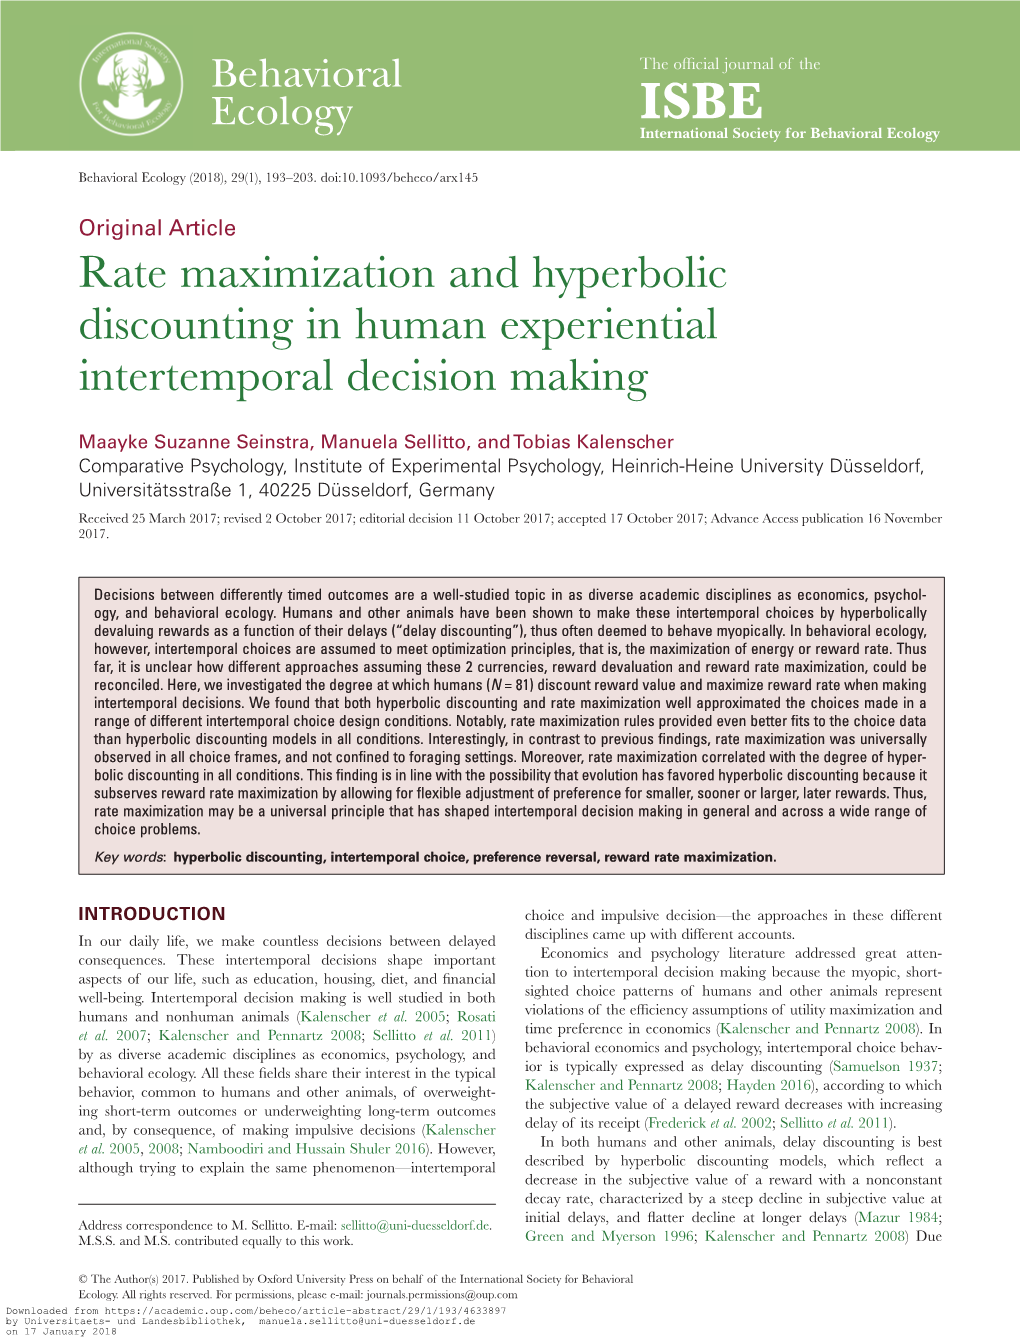 Rate Maximization and Hyperbolic Discounting in Human Experiential Intertemporal Decision Making